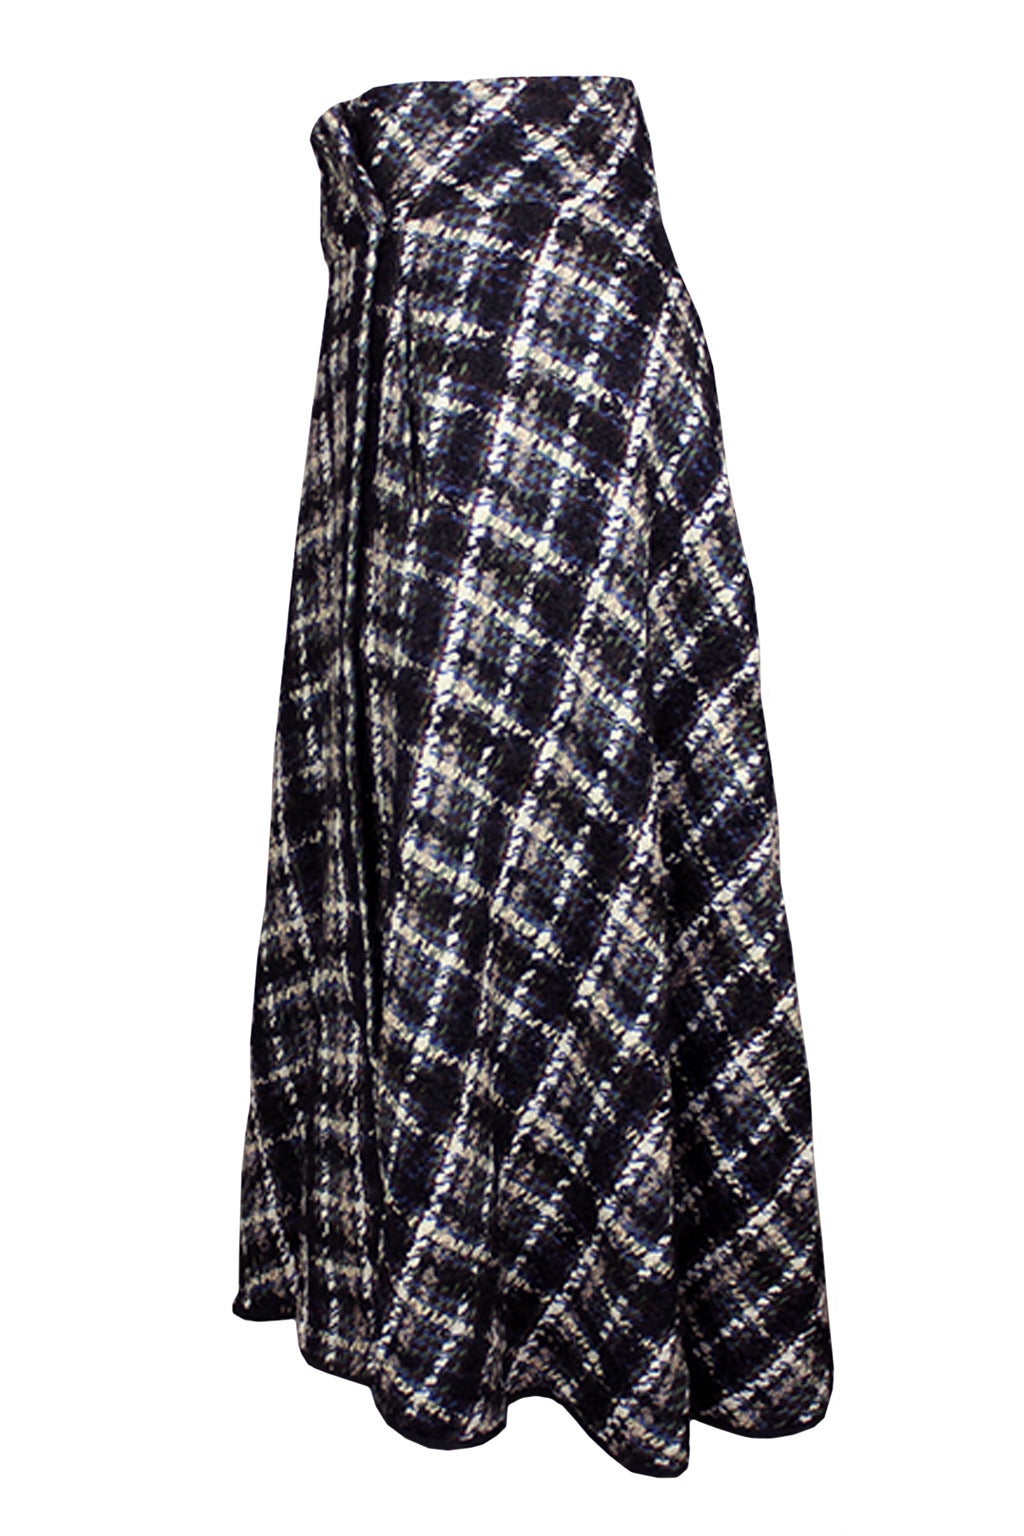 SALE! Originally $695
This elegant skirt has a wide waist band and full skirt. It drapes beautifully with a generous overlap where the fabric wraps, and is fully lined. The plaid is a lovely brown, ivory, black, green, and blue combination.